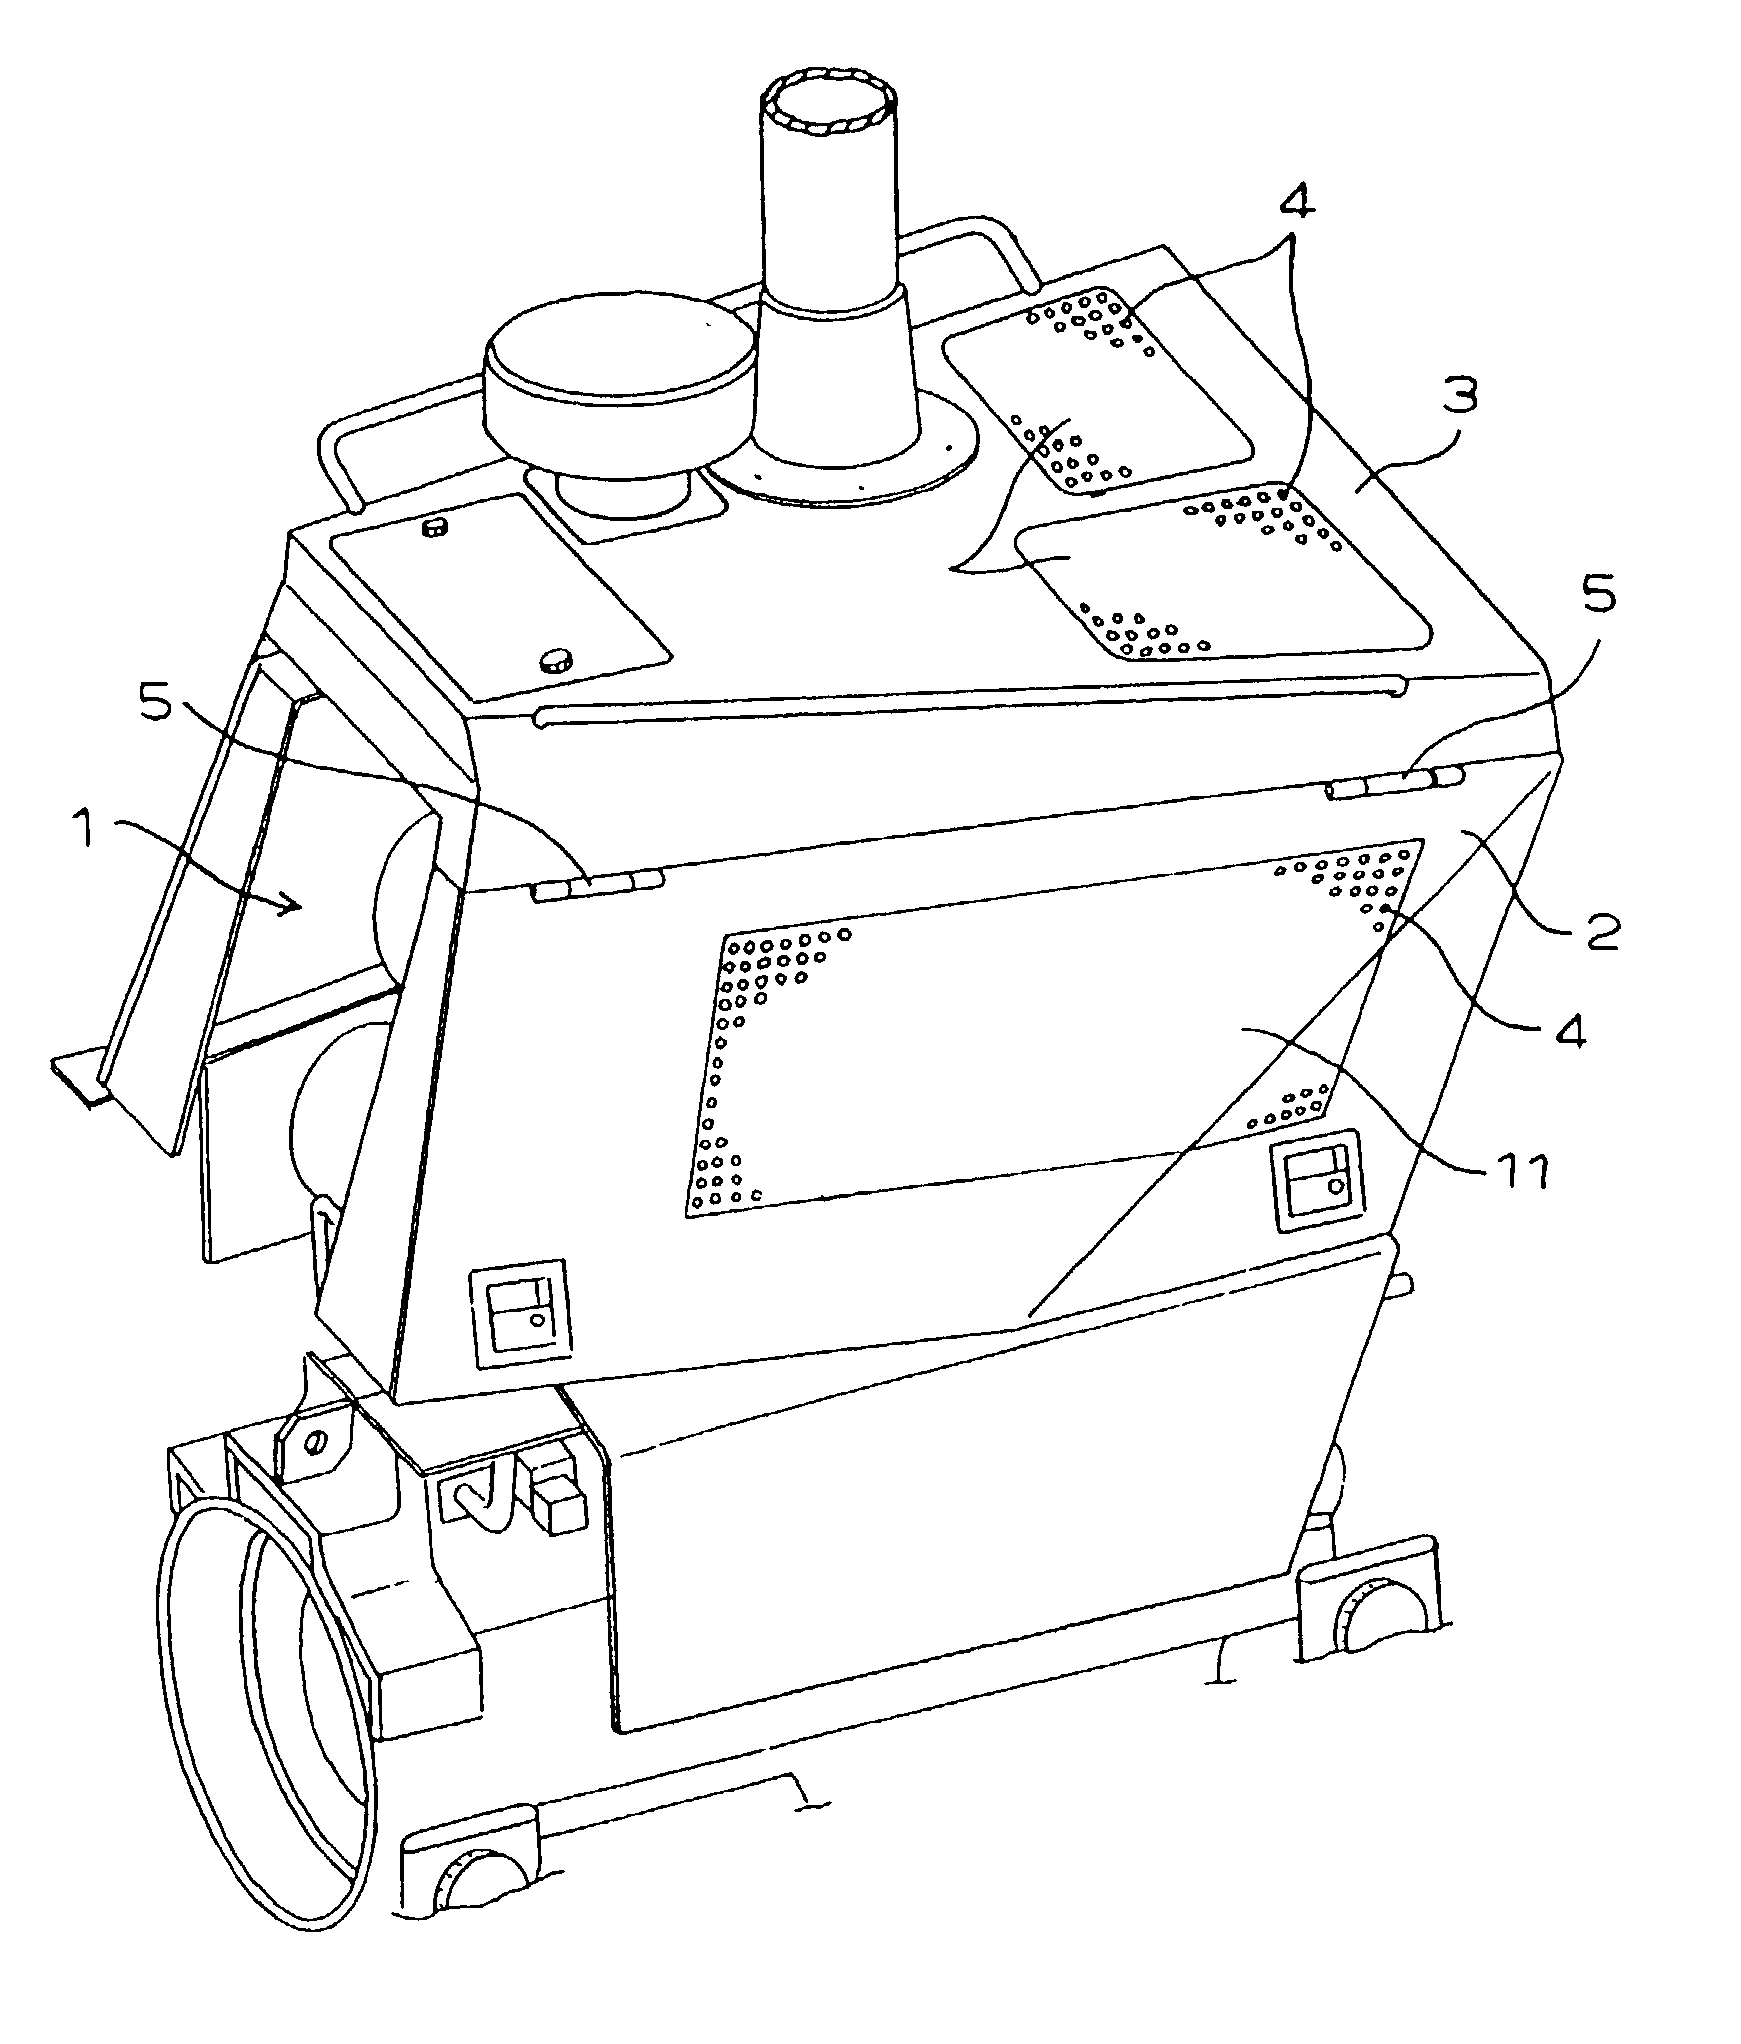 Engine compartment structure of a work machine